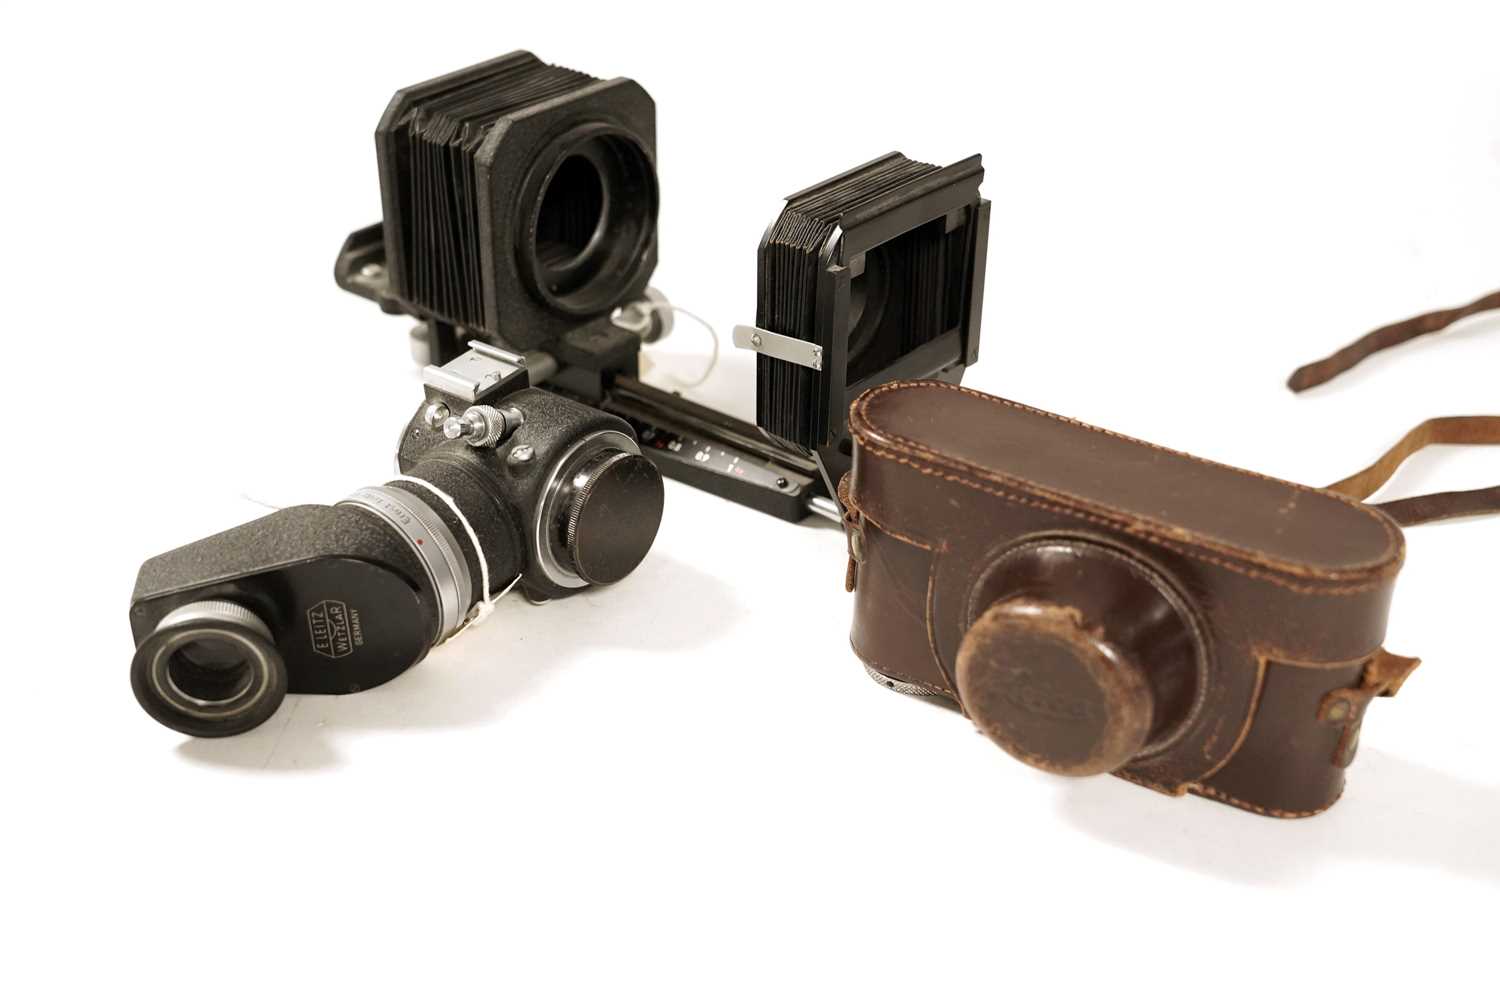 A Leica IIIc rangefinder camera, and other Leica/Leitz accessories